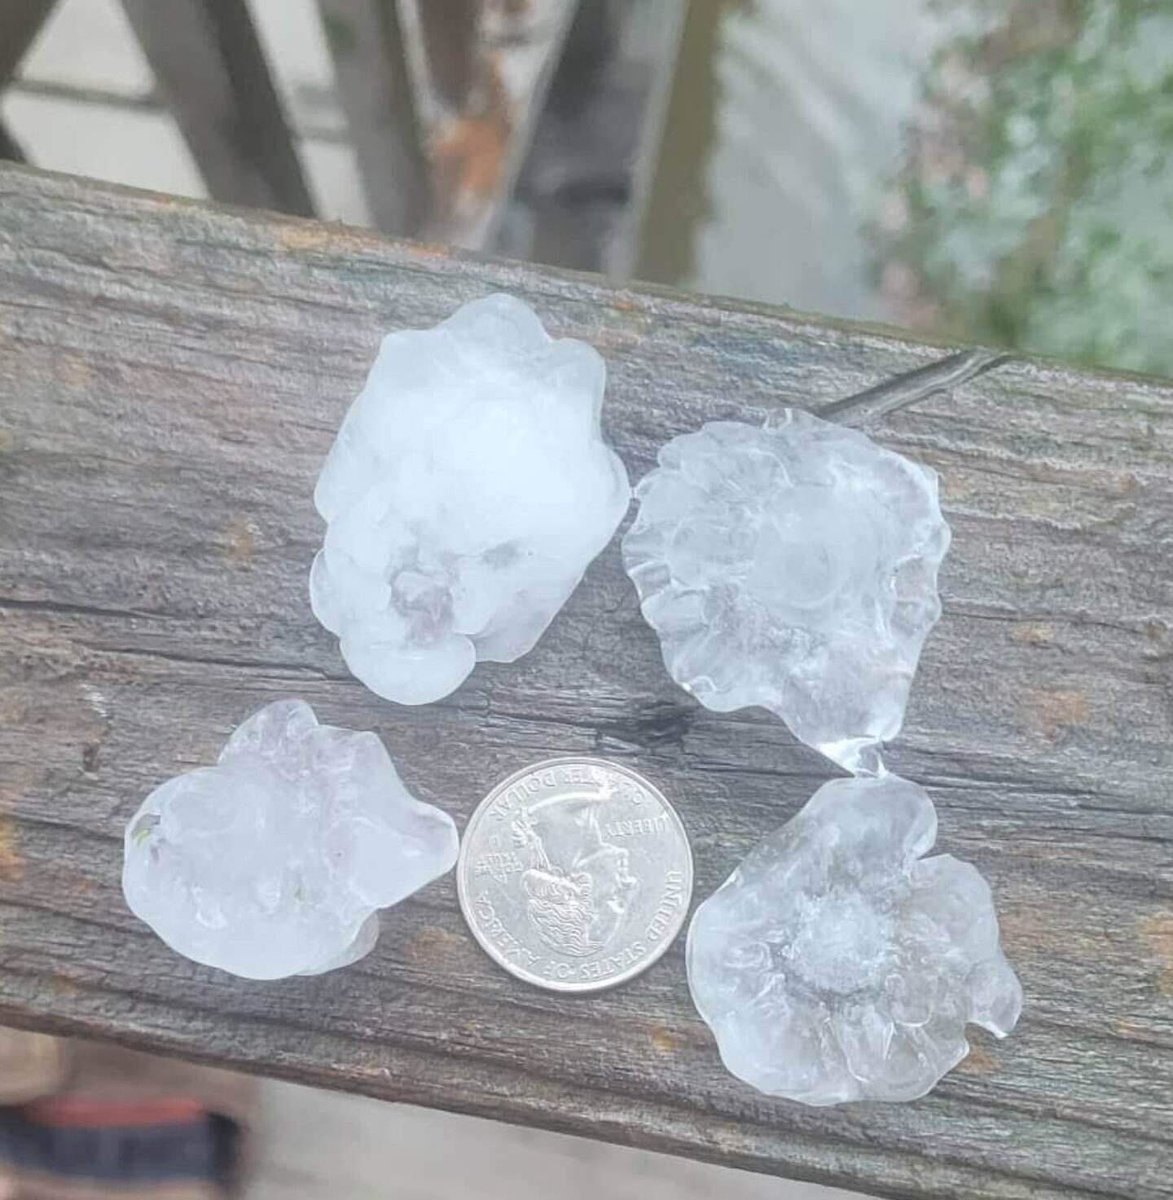 WYMT Weather Spotter Scott Feltner sends us this photo of large hail near Lee's Ford Marina west of Somerset. This was as that hail core approached Somerset earlier. Thanks for sending, Scott! Track with interactive radar: wymt.com/weather